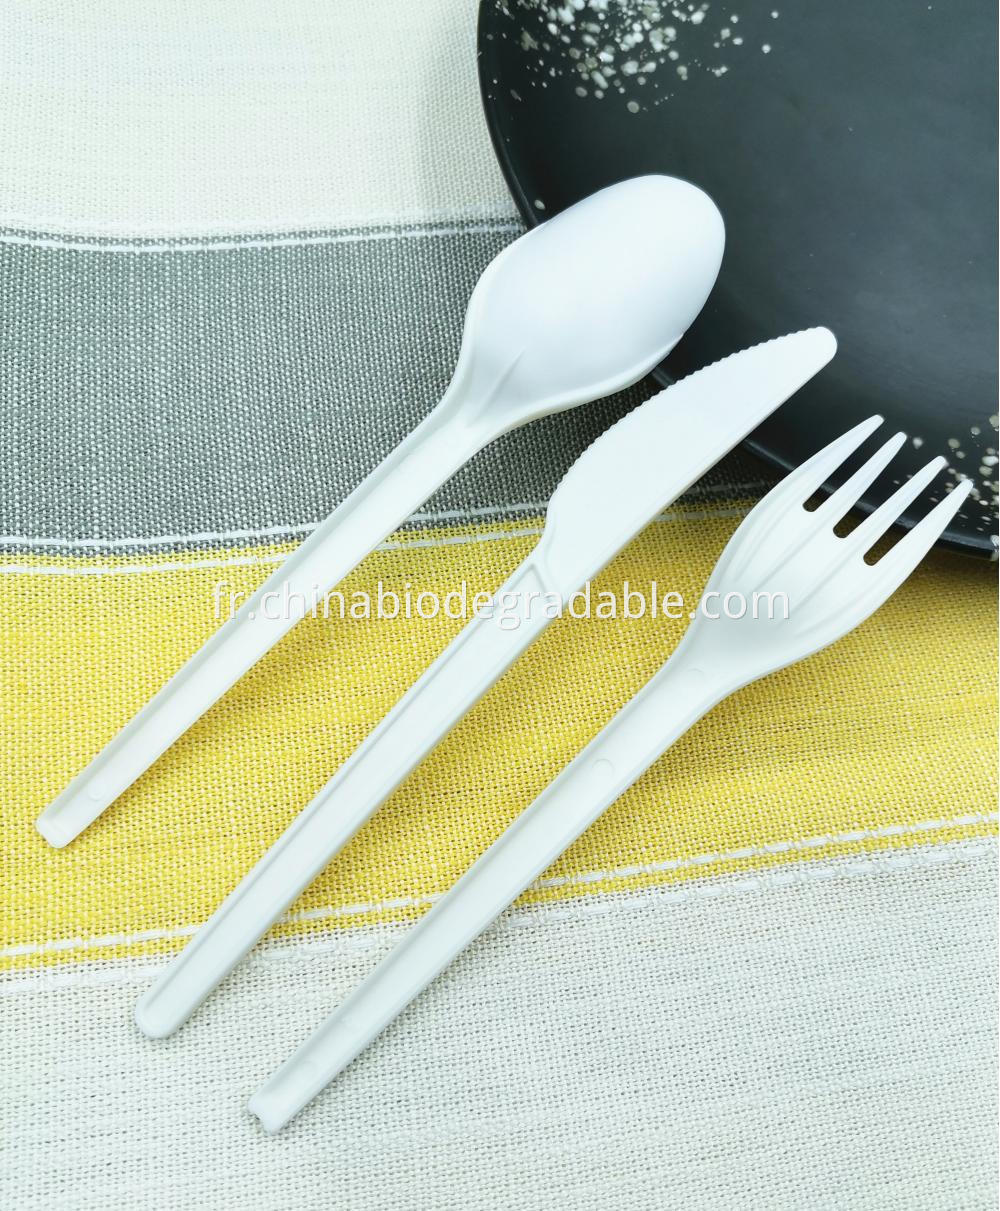 100% Biodegradable Cutlery Forks Knifes Spoons